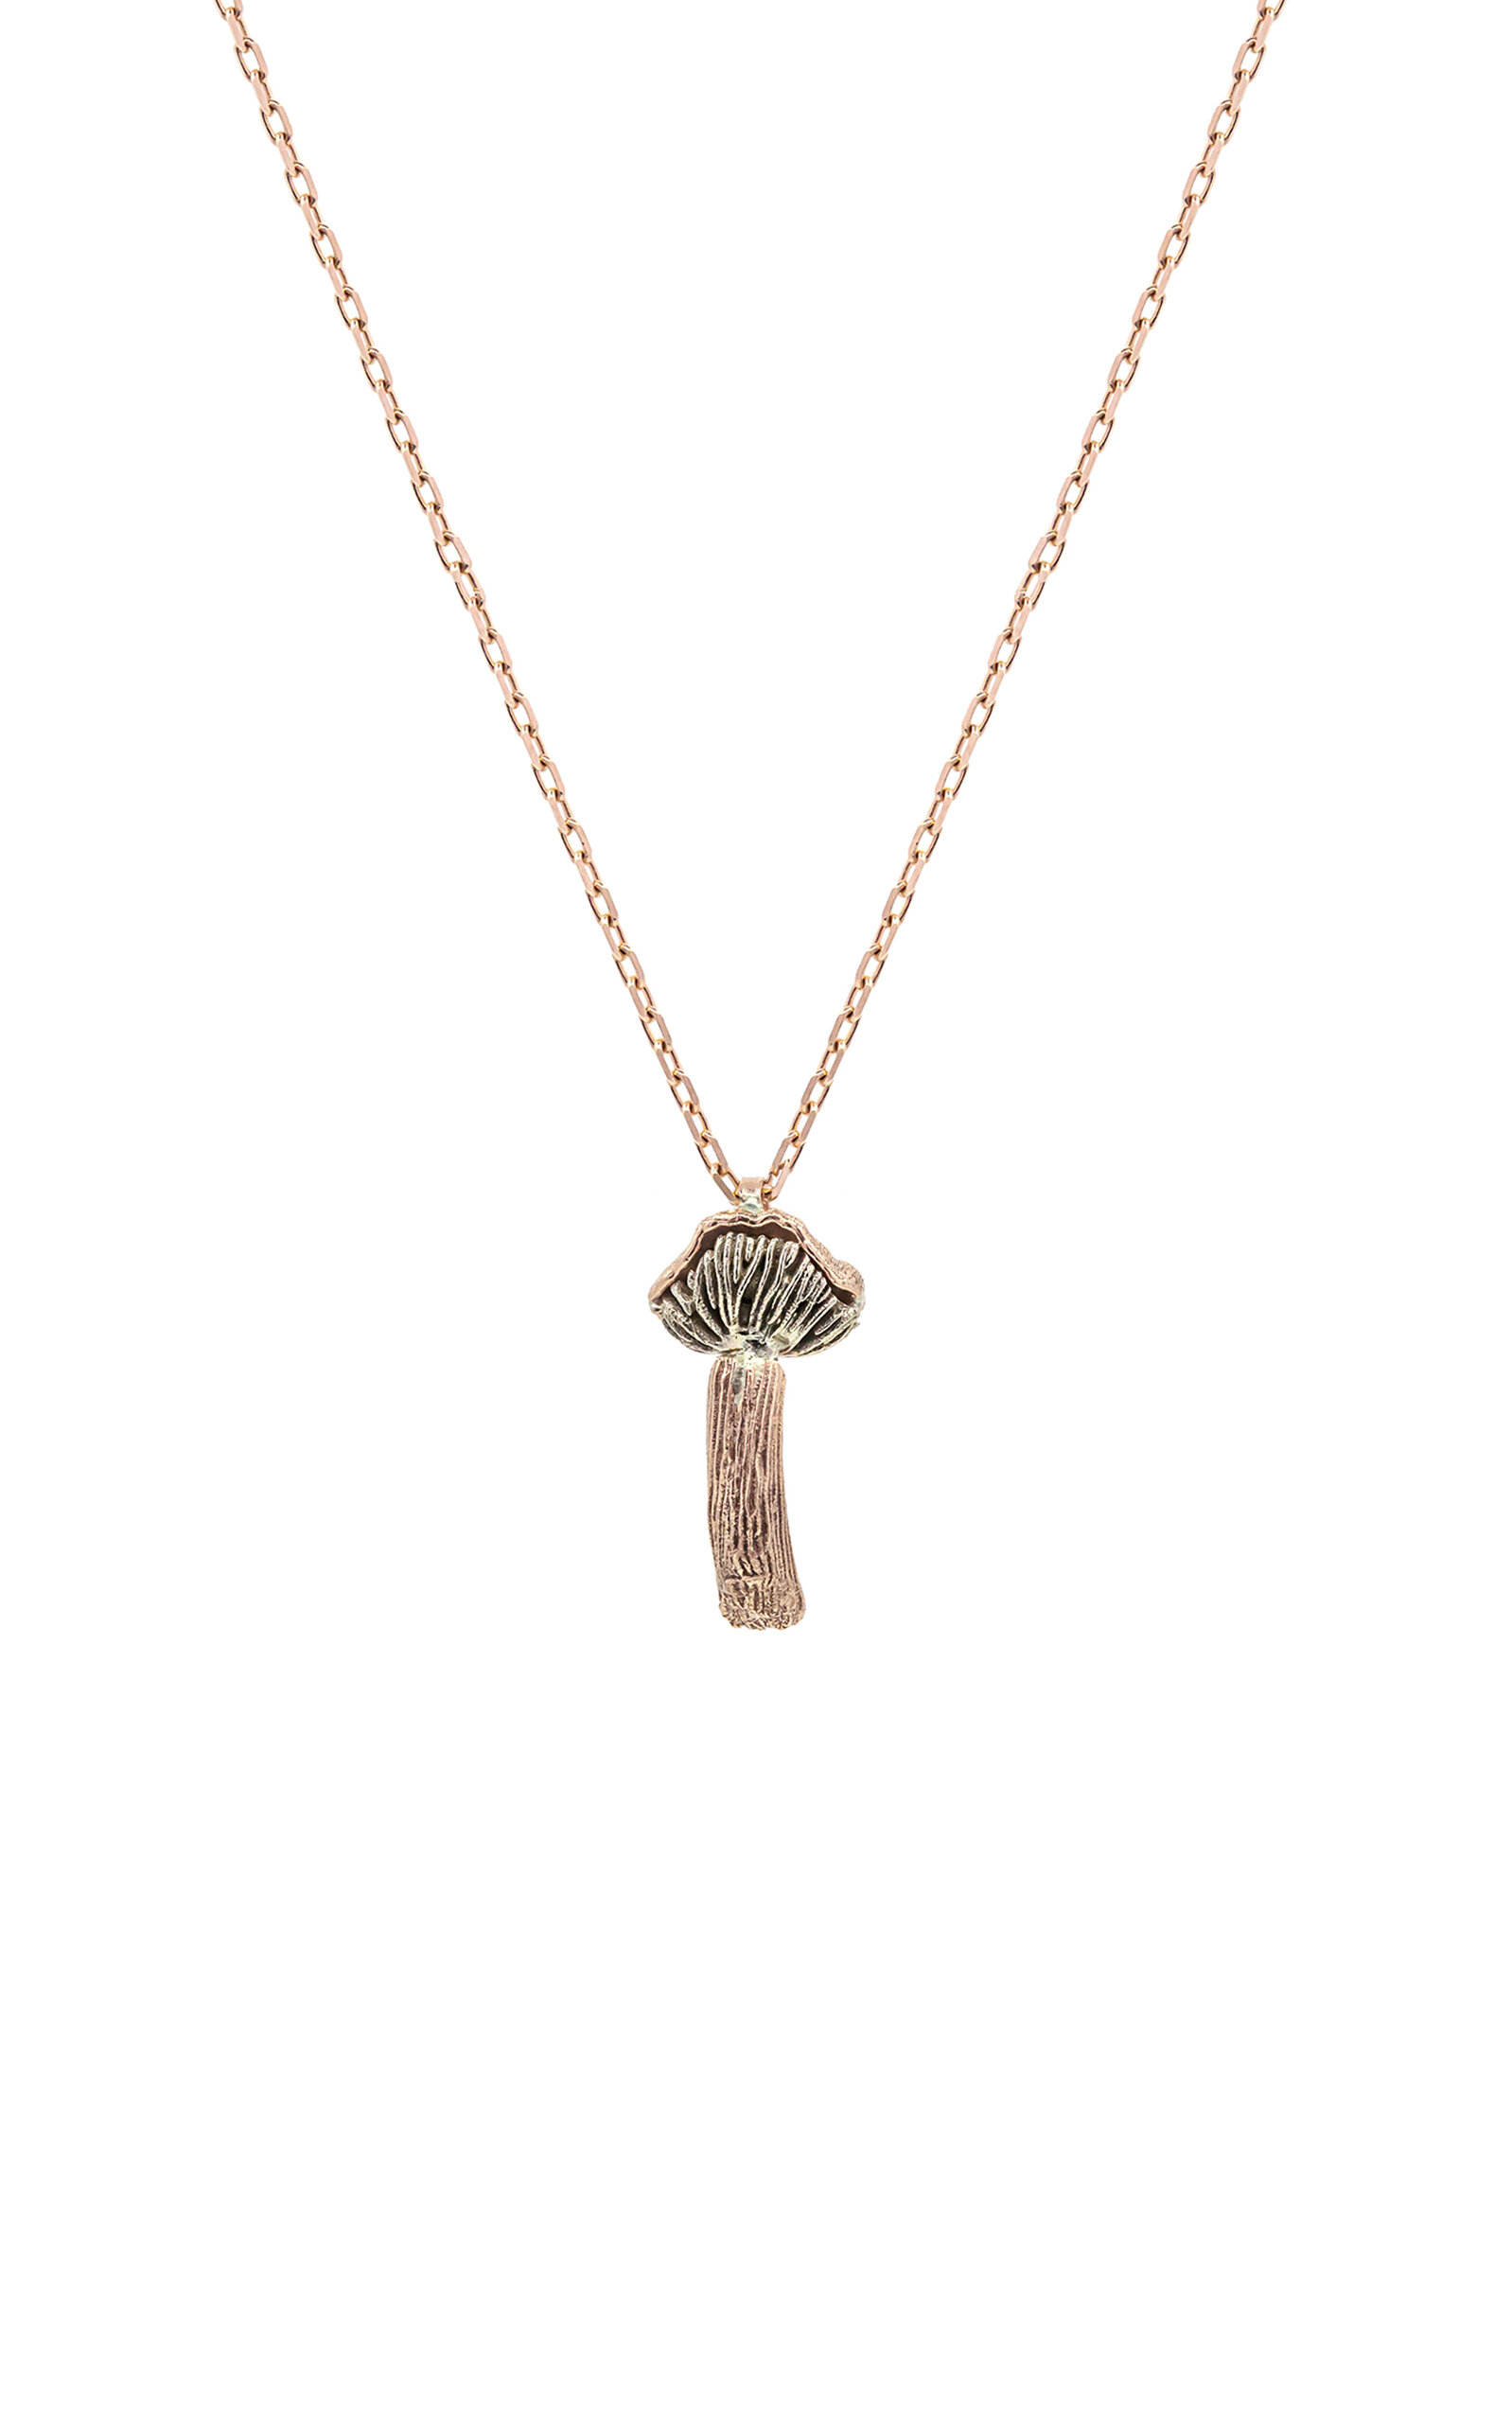 Fungi Laccaria 14K Rose and White Gold Necklace